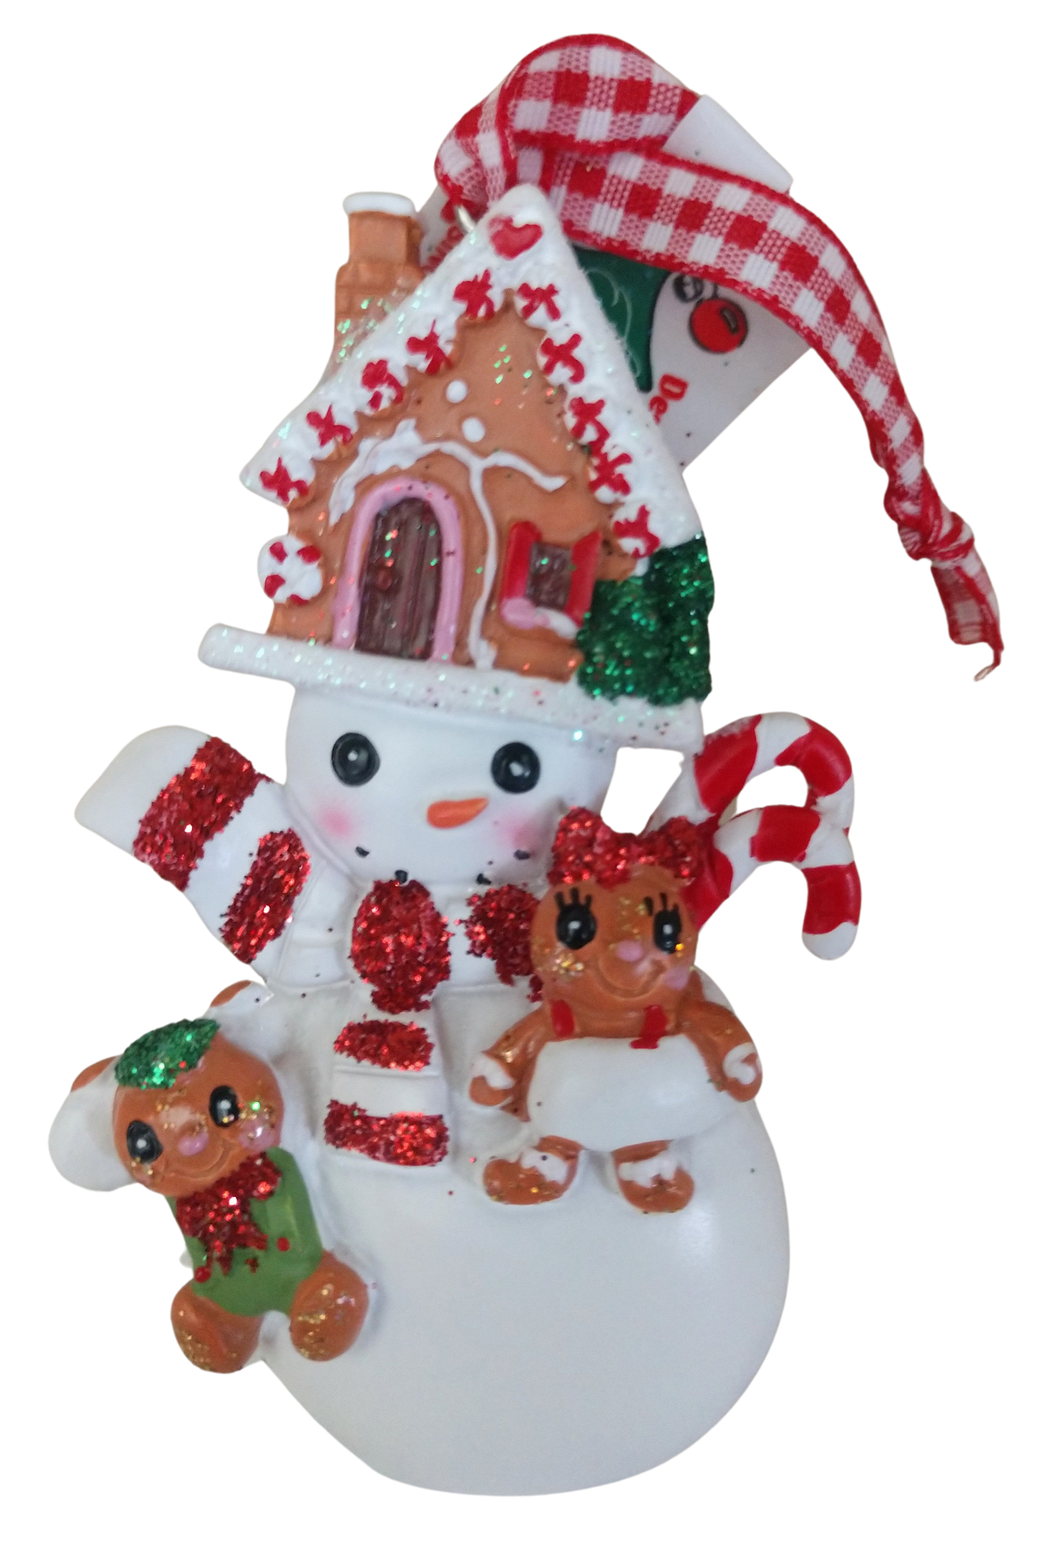 Gingerbread  Snowman Ornament with Gingerbread House on Head 3.5